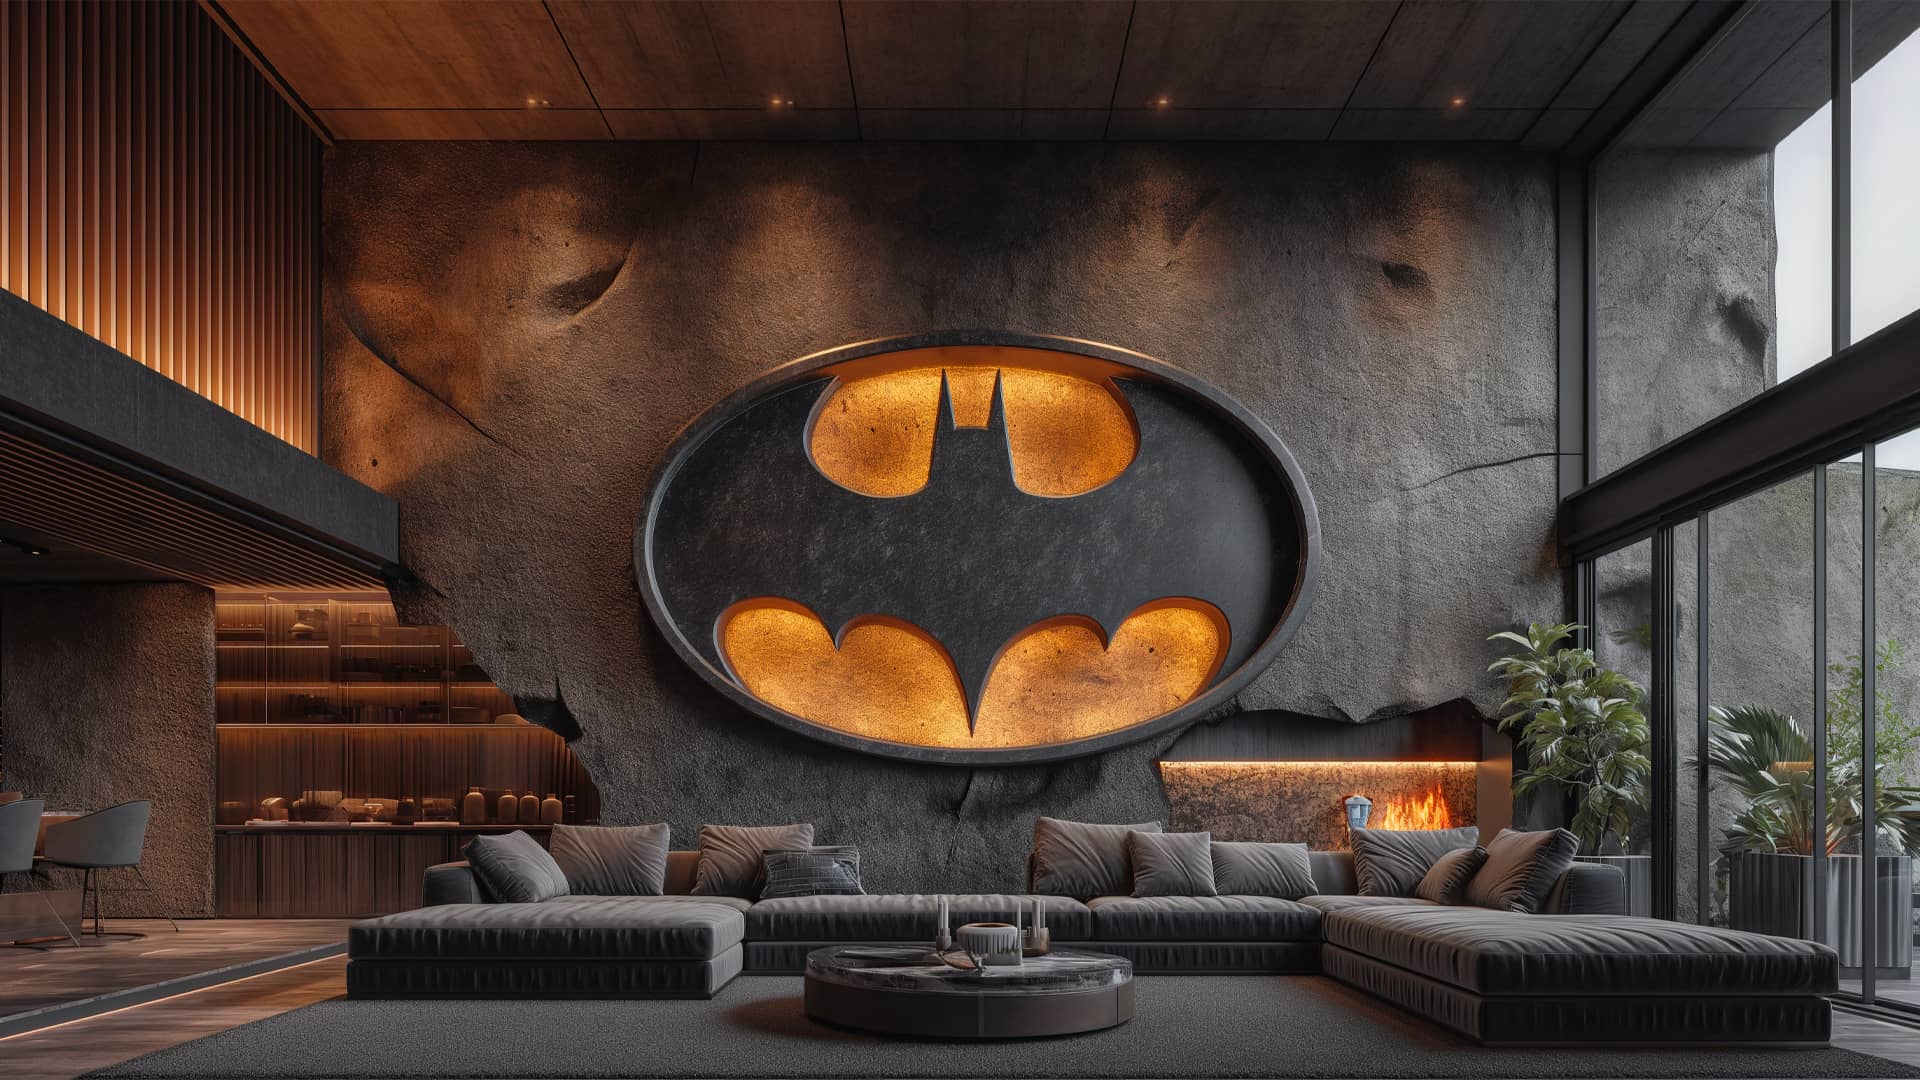 These Ideas For A Batman-Inspired Home Will Add Mood To Those Dark Nights